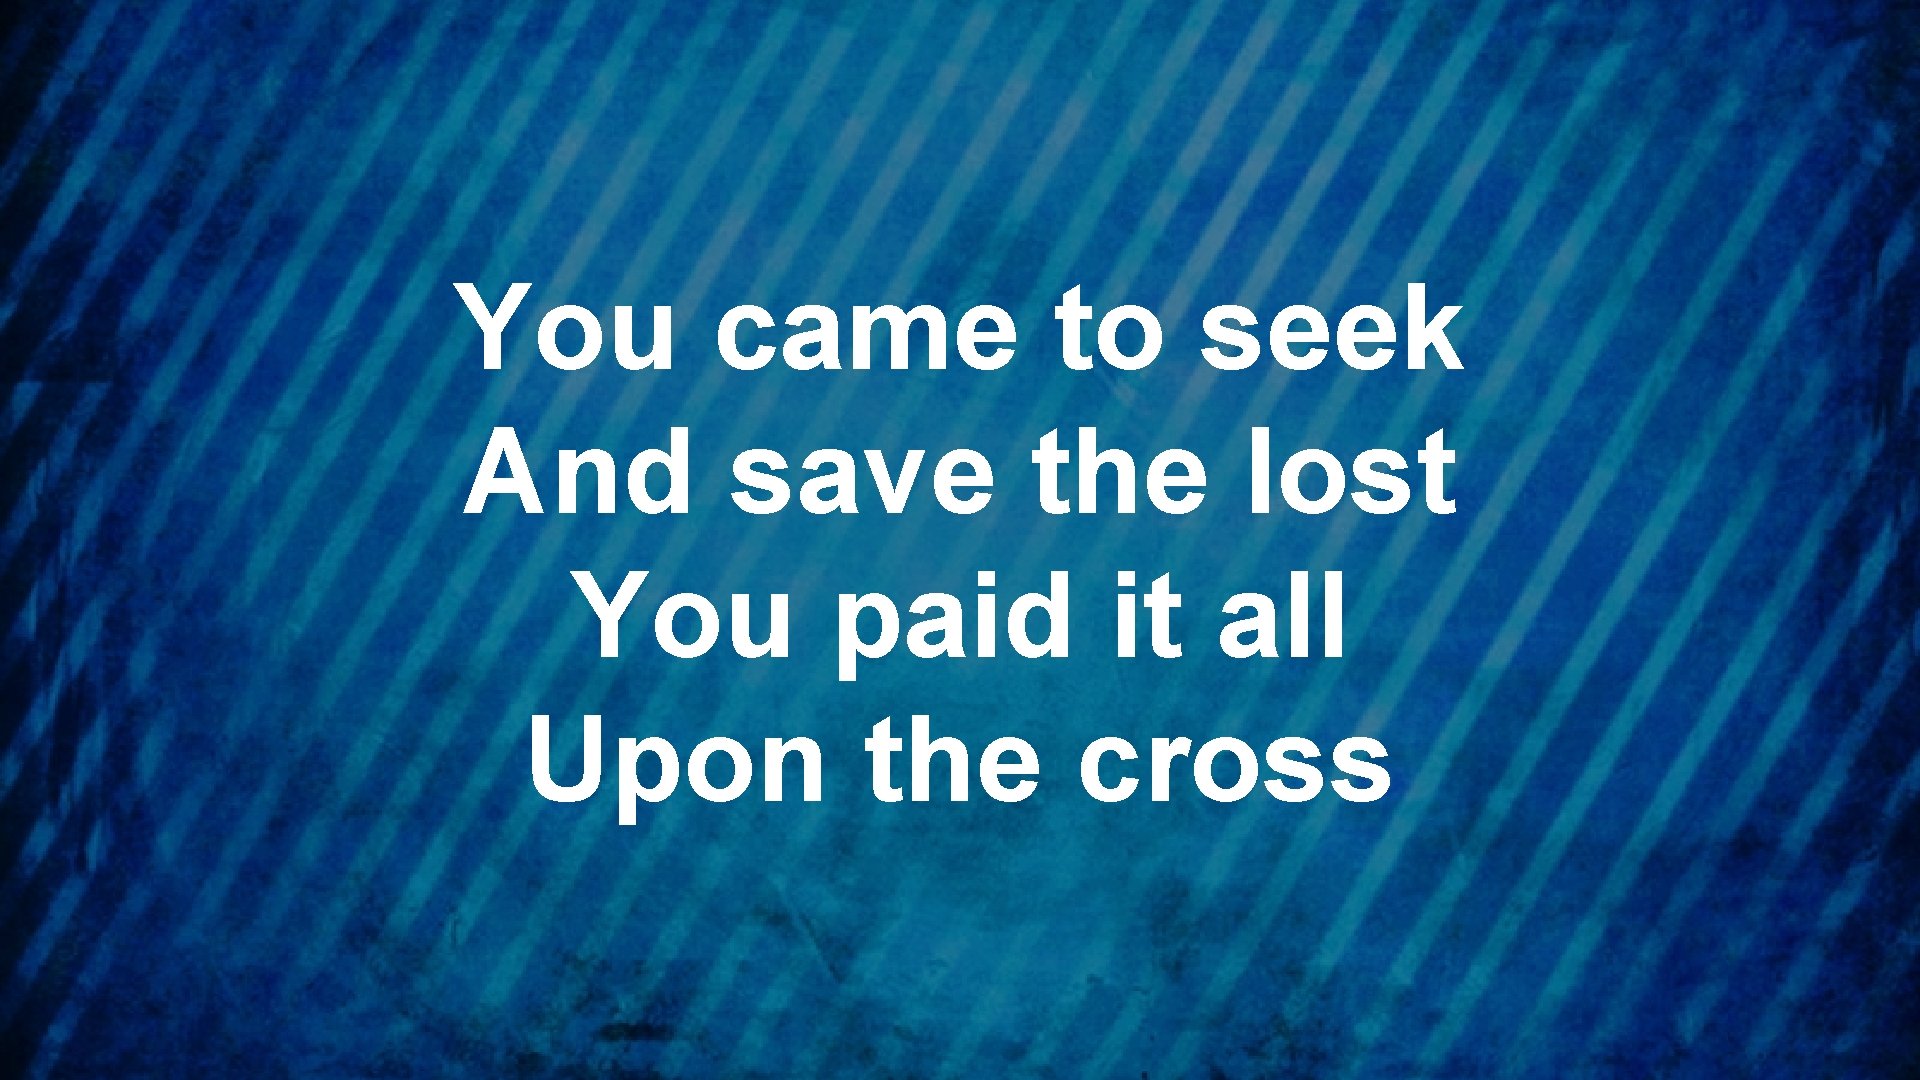 You came to seek And save the lost You paid it all Upon the